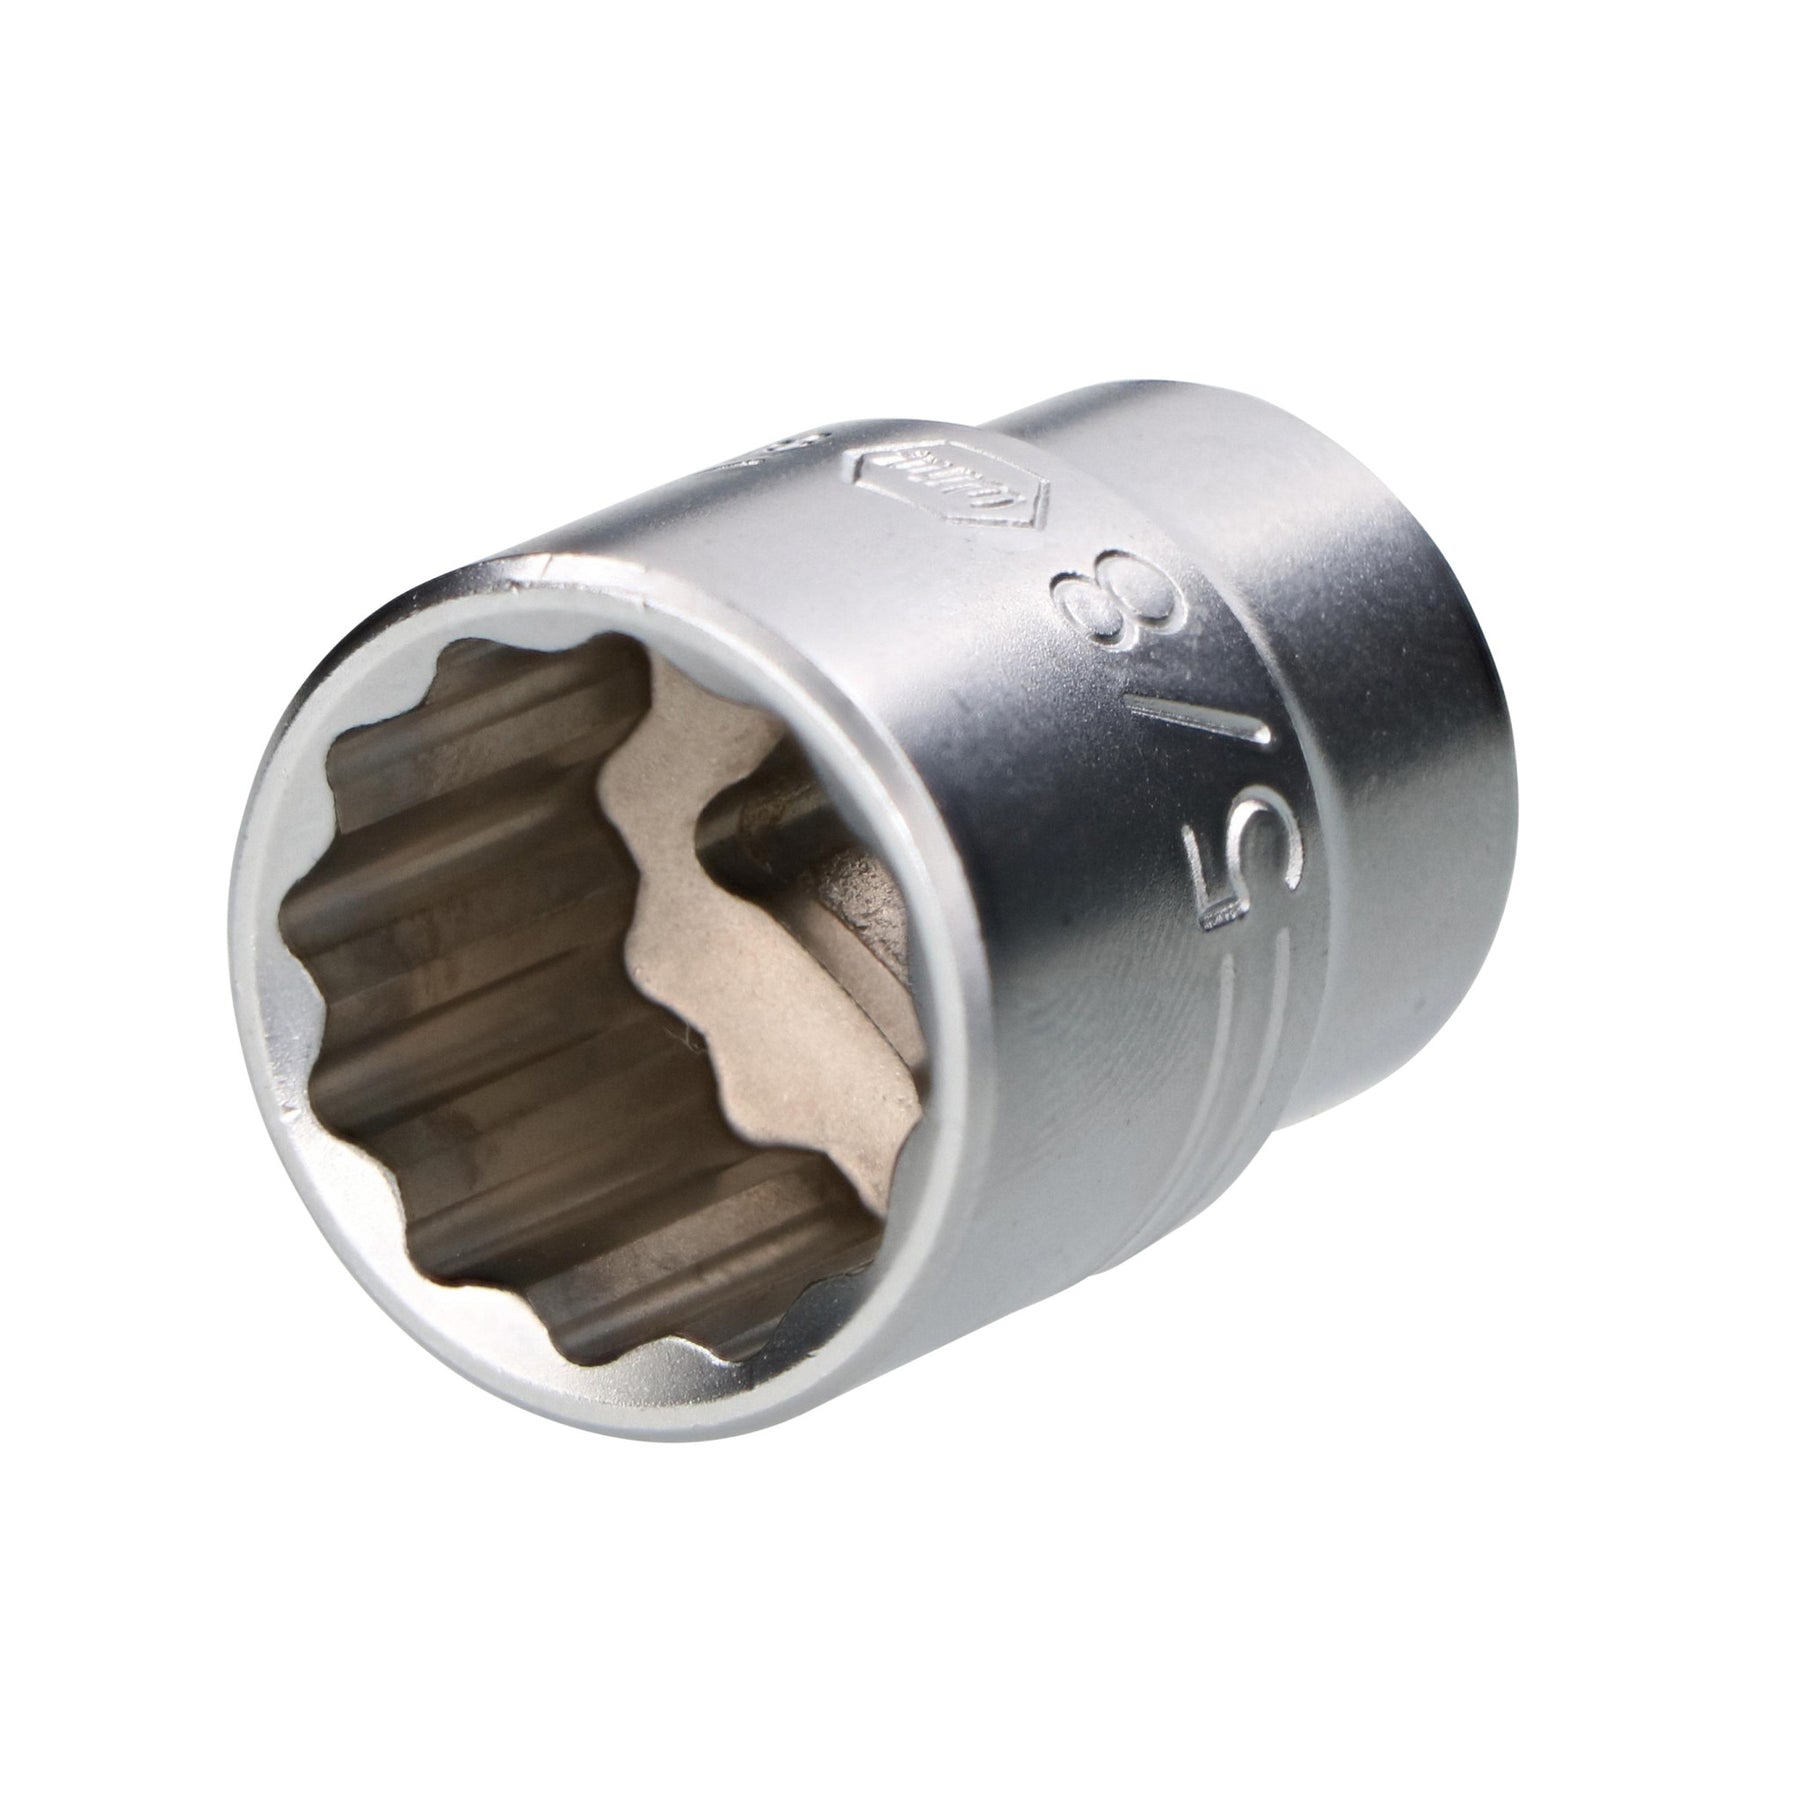 12 Point - 3/8 Inch Drive Socket - 5/8"